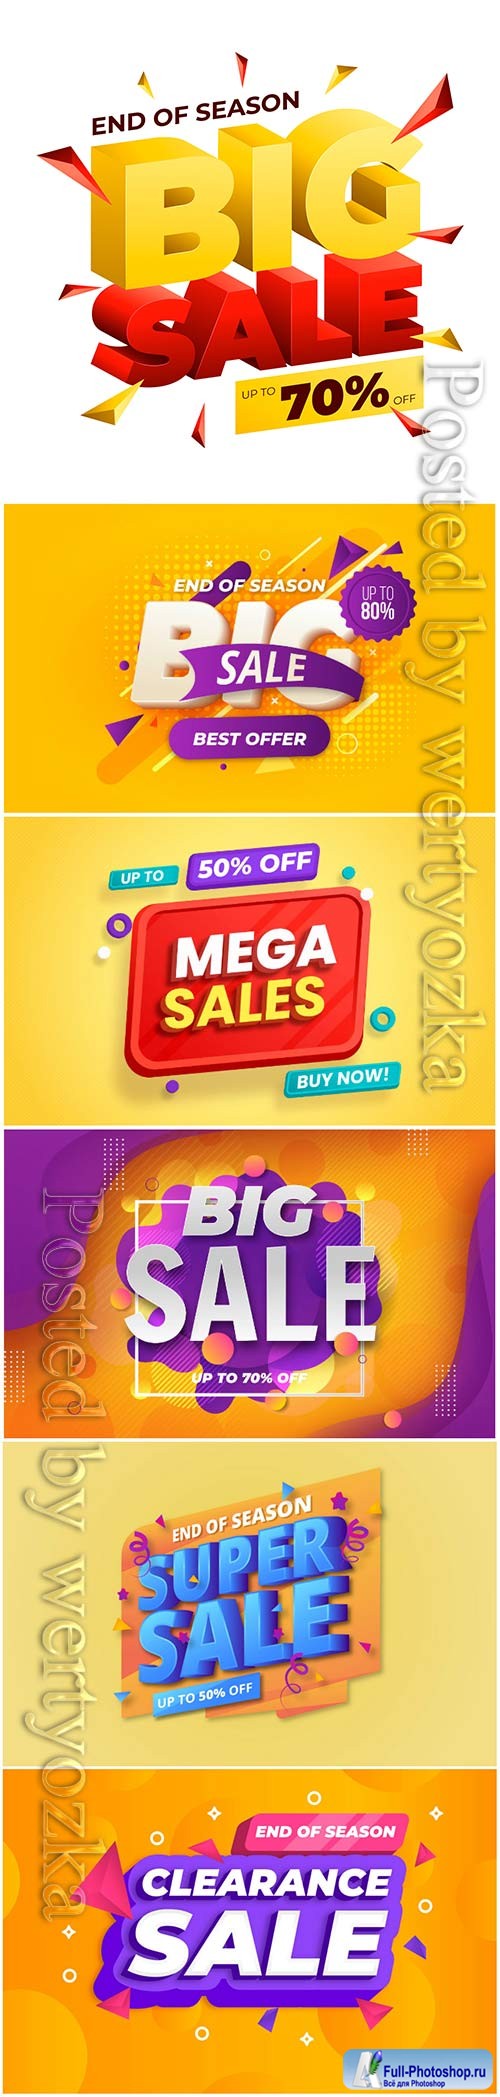 Colorful 3d sales vector background # 2